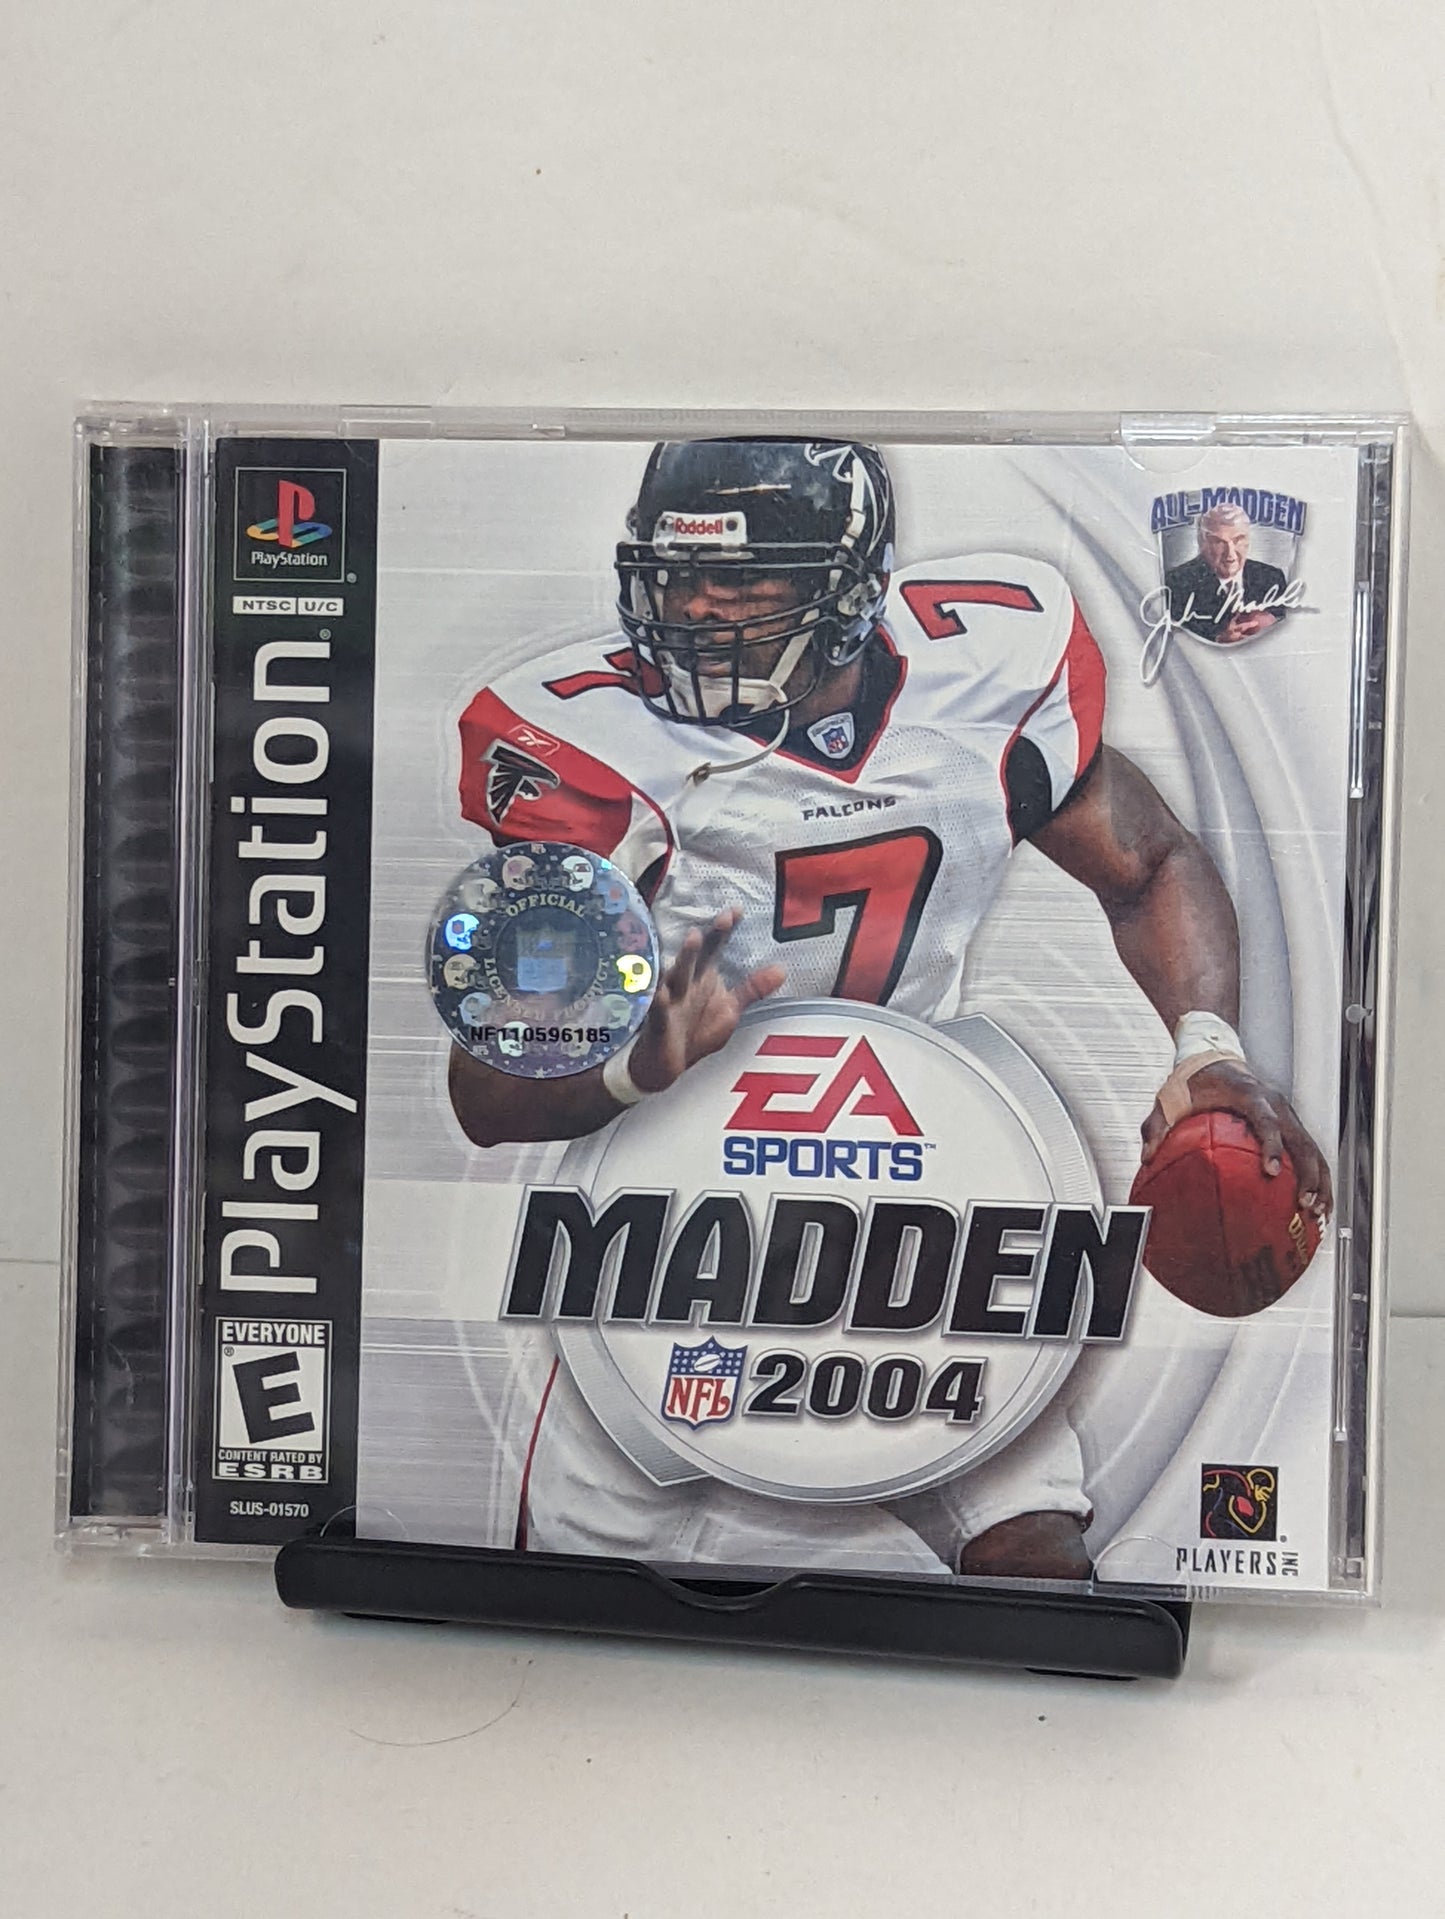 PS1 Madden 2004 game